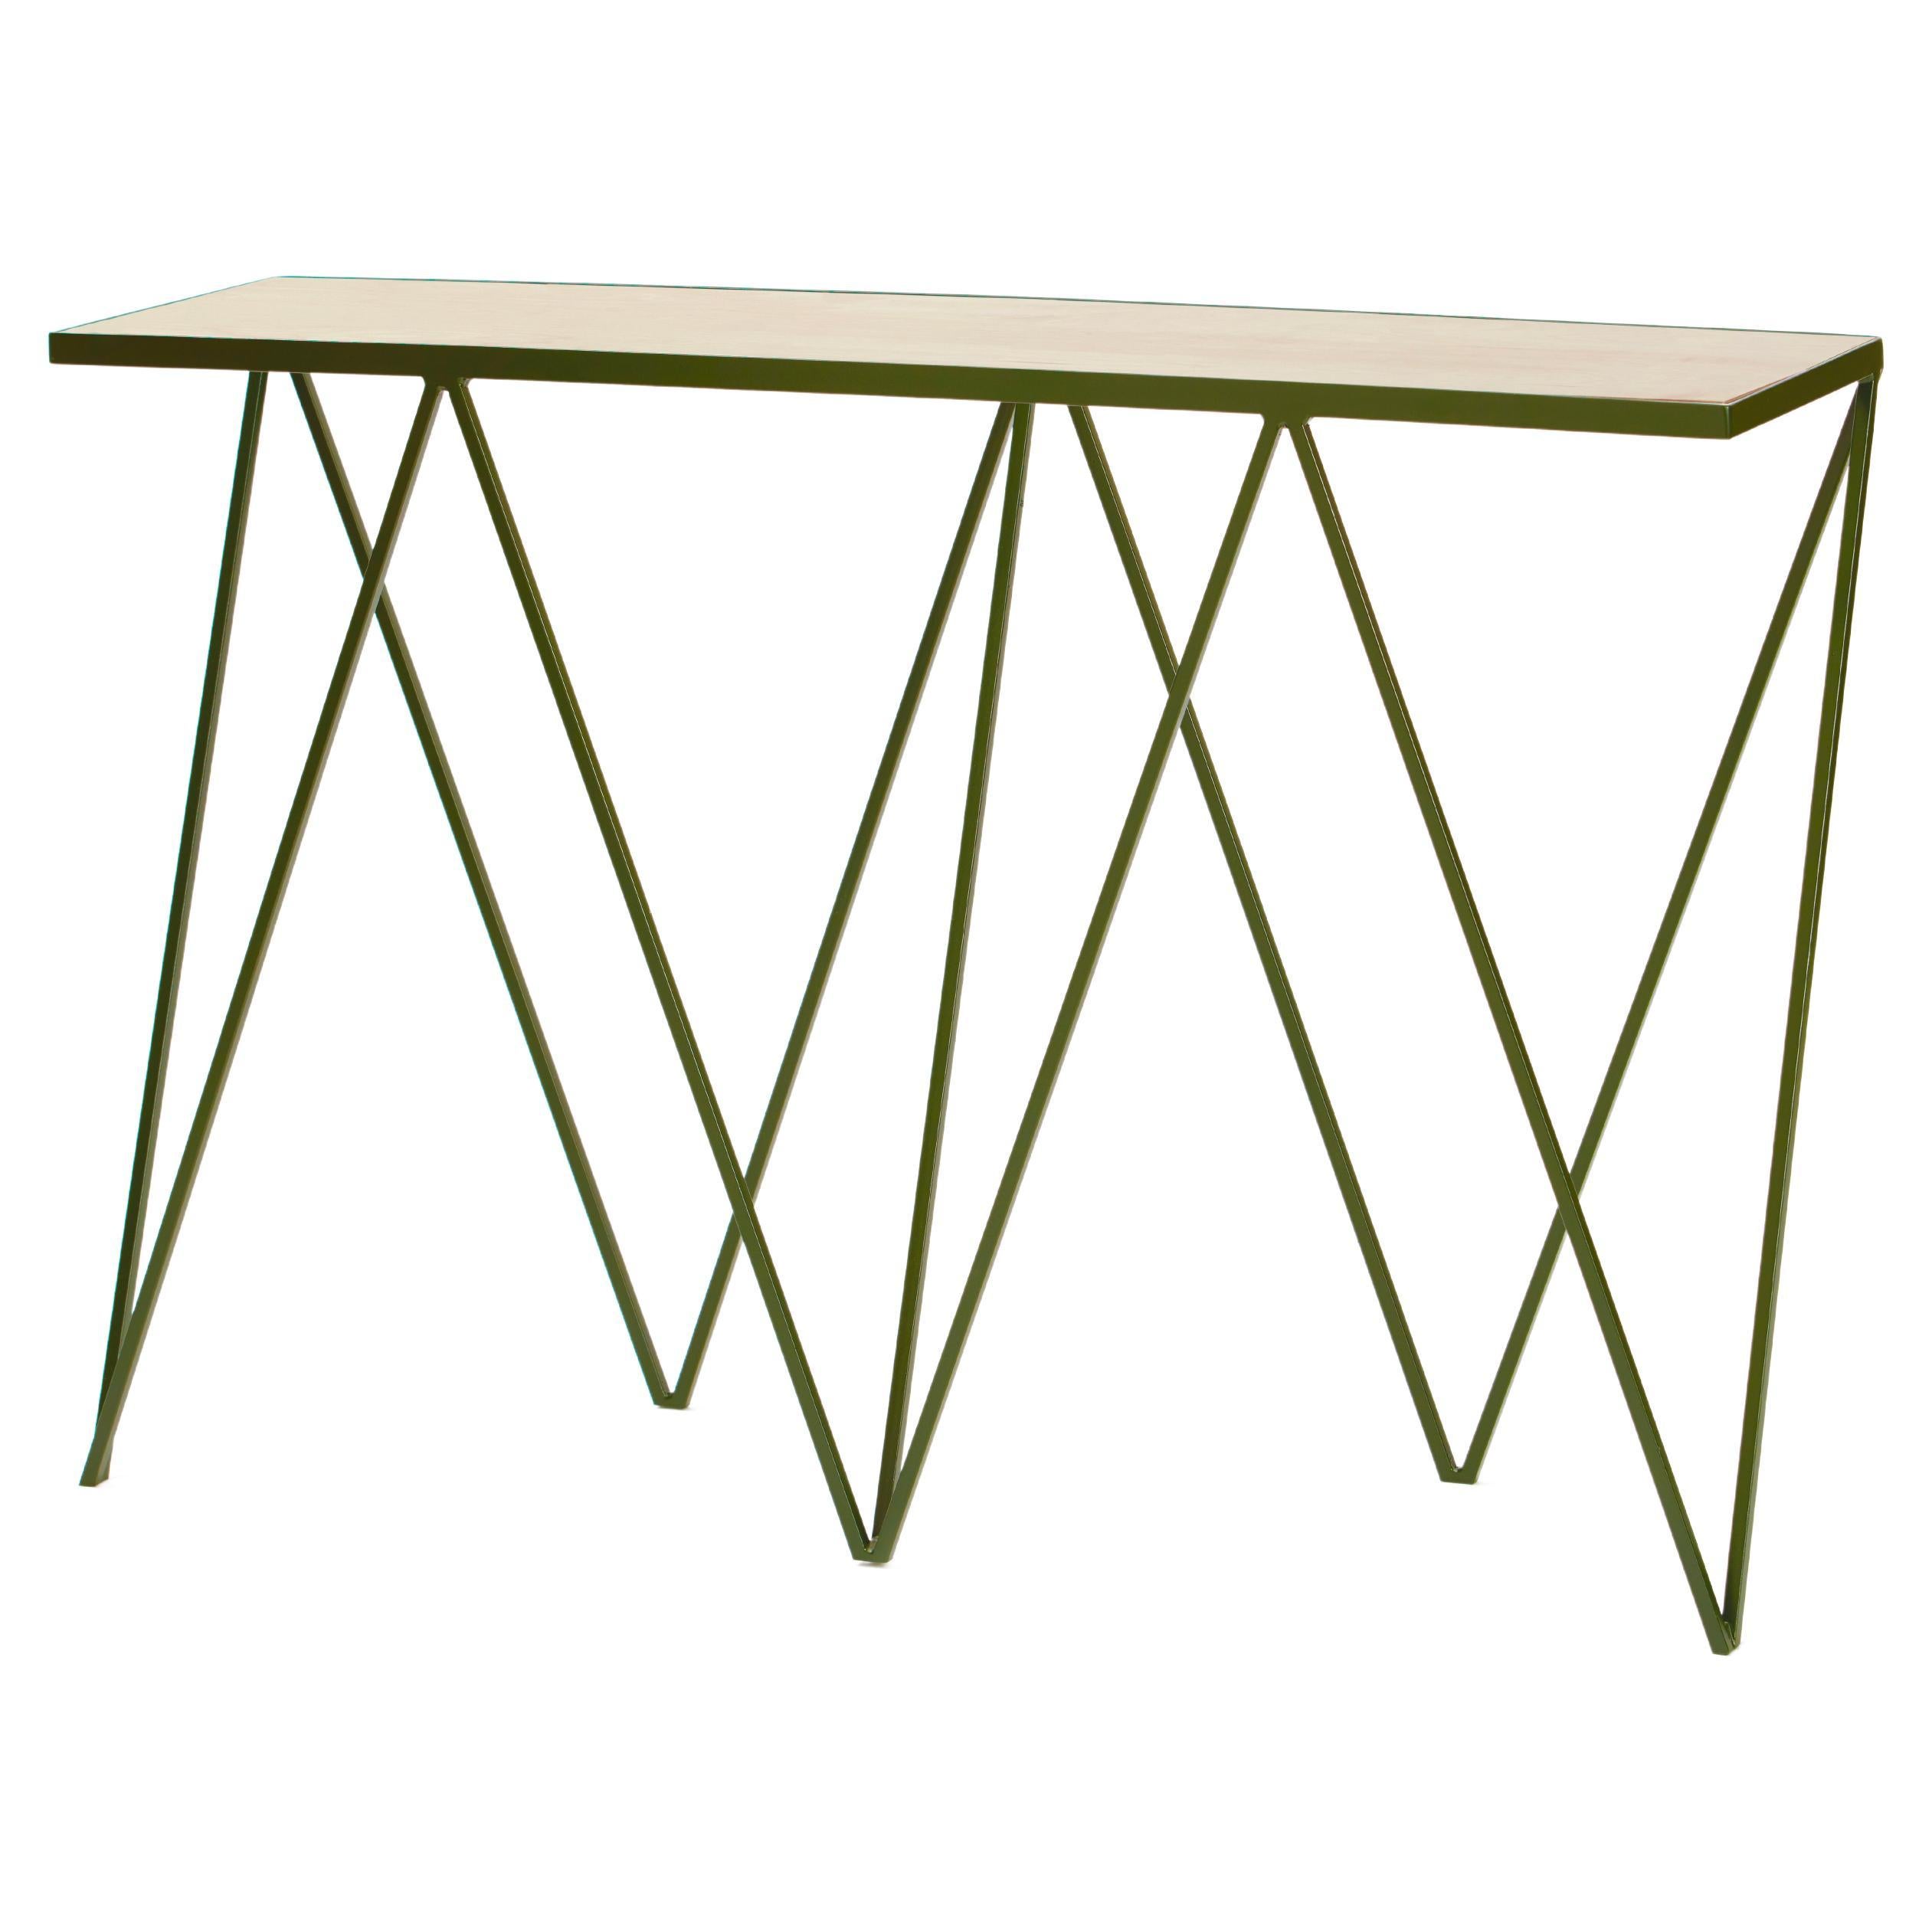 Slim Deep Green Steel Console Table with Wood Table Top / Customizable For Sale